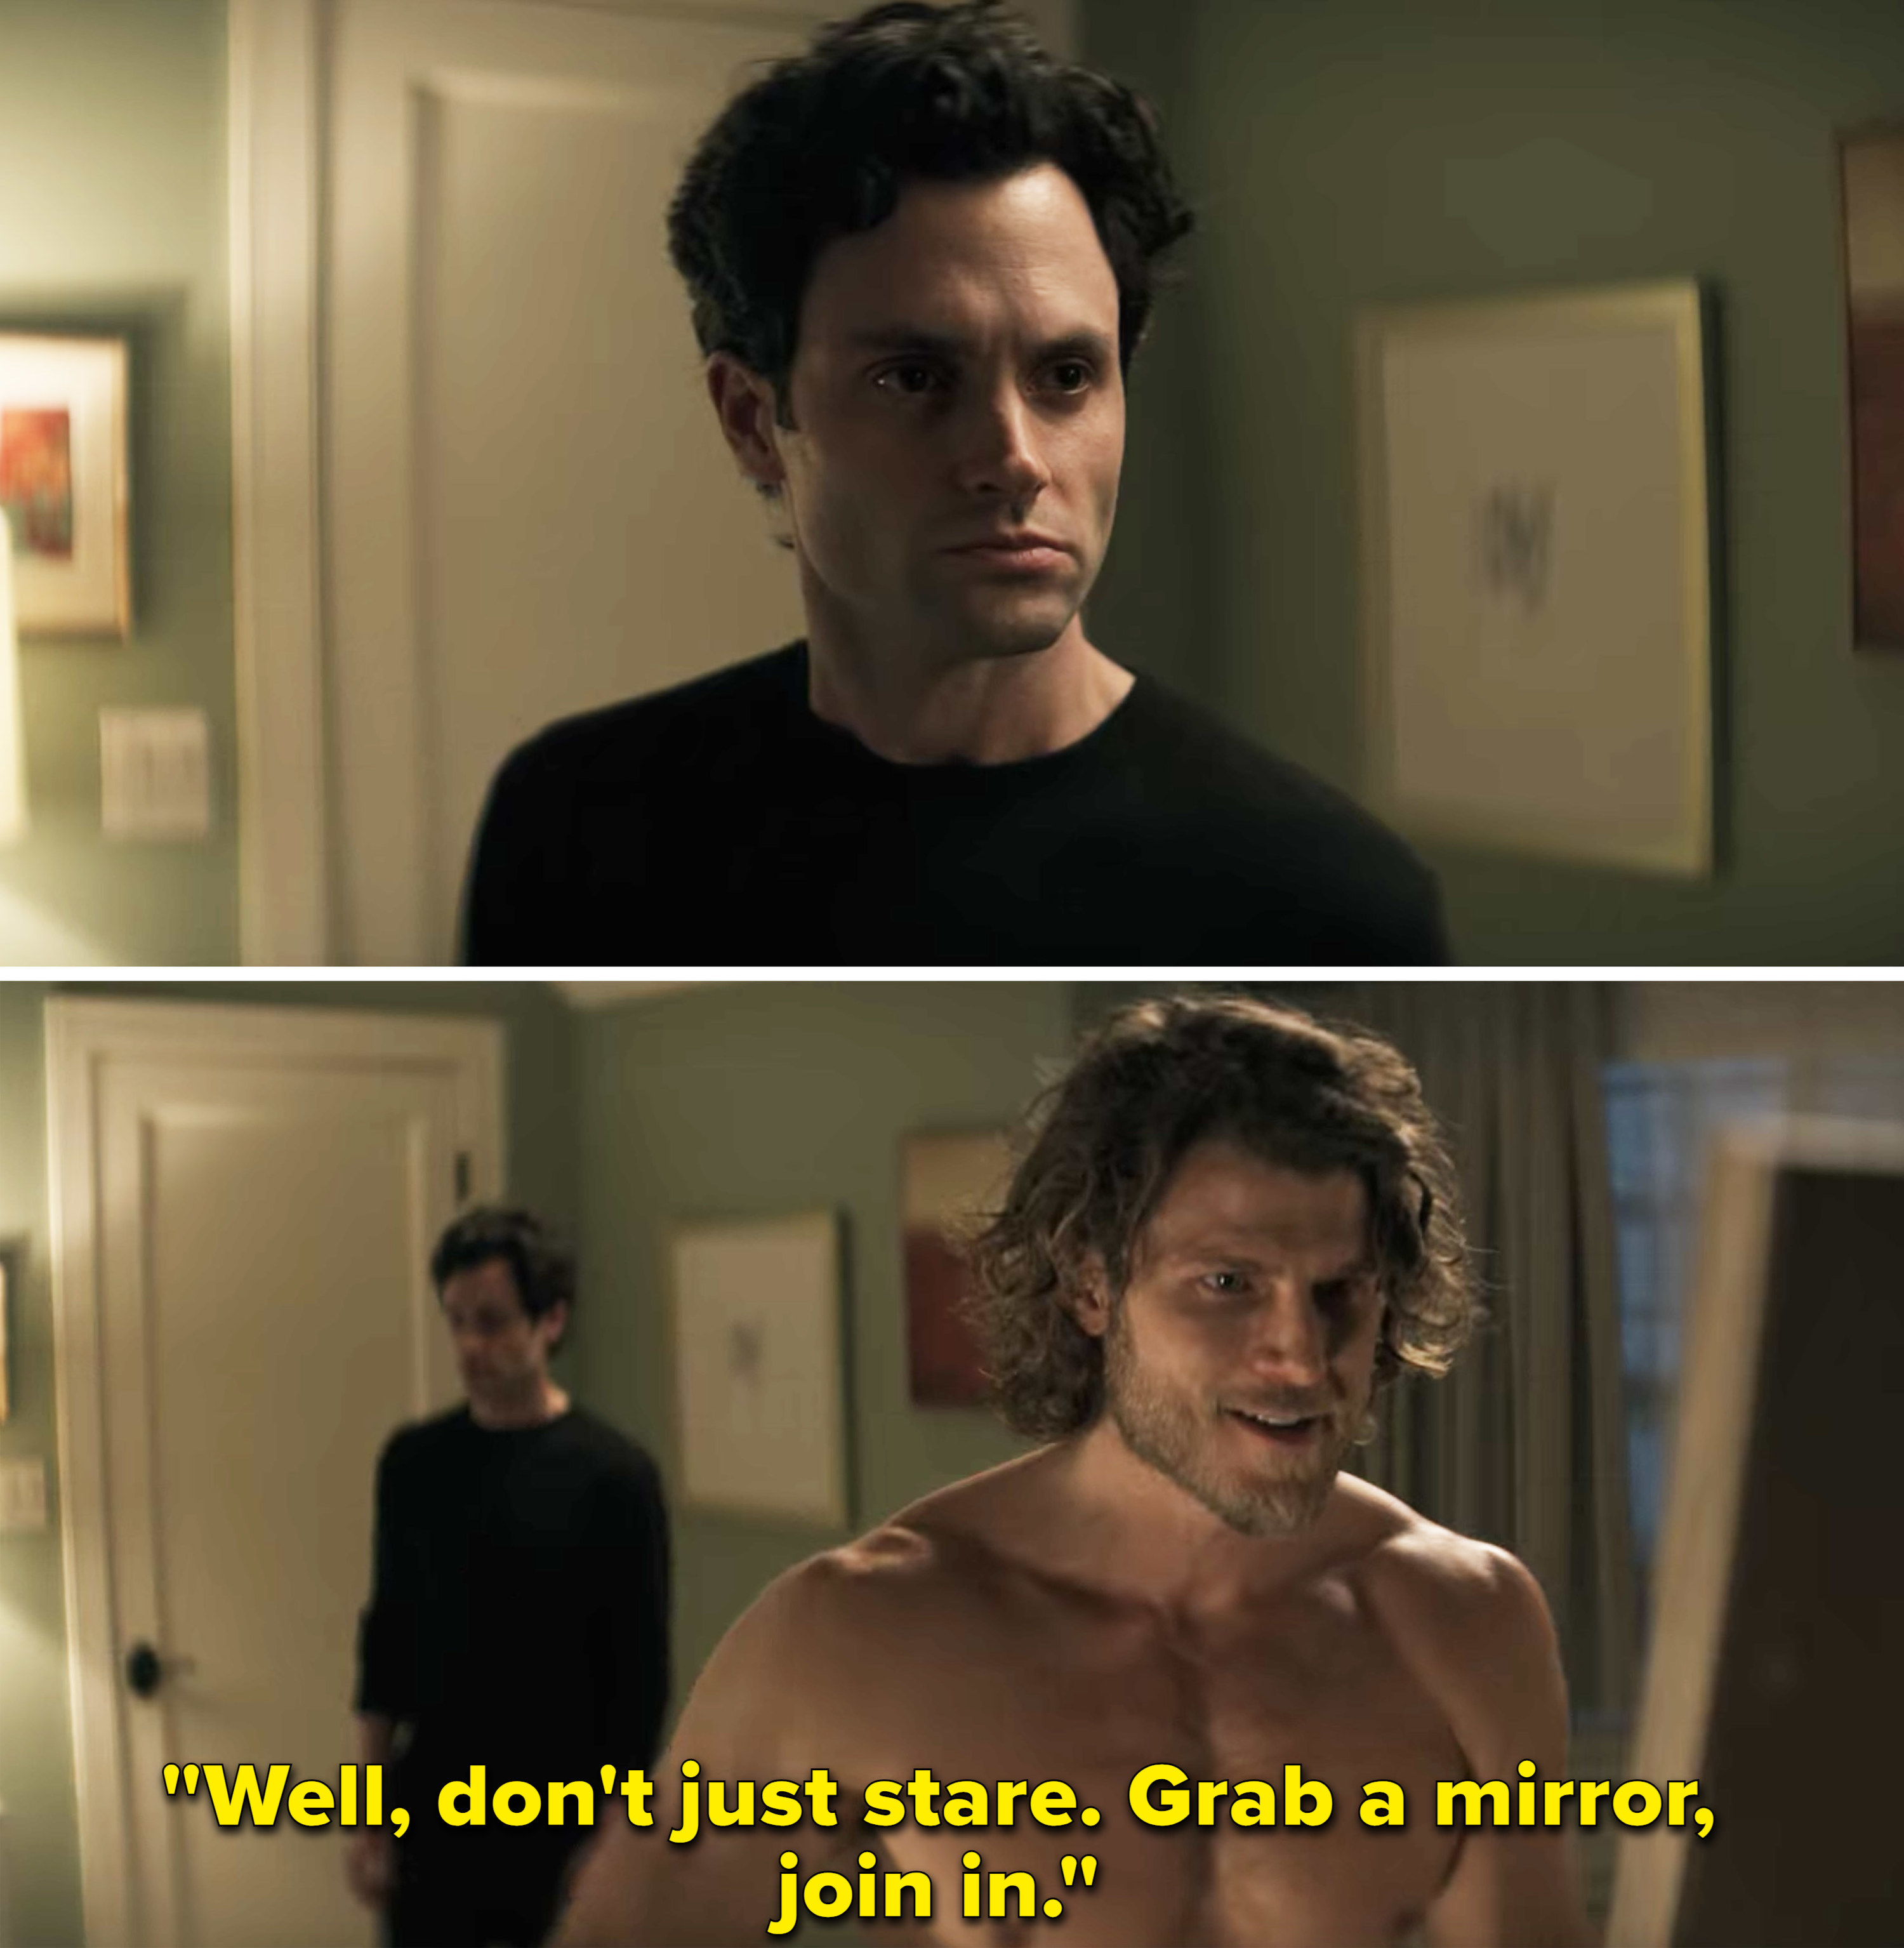 Cary looking in the mirror and telling Joe to join in